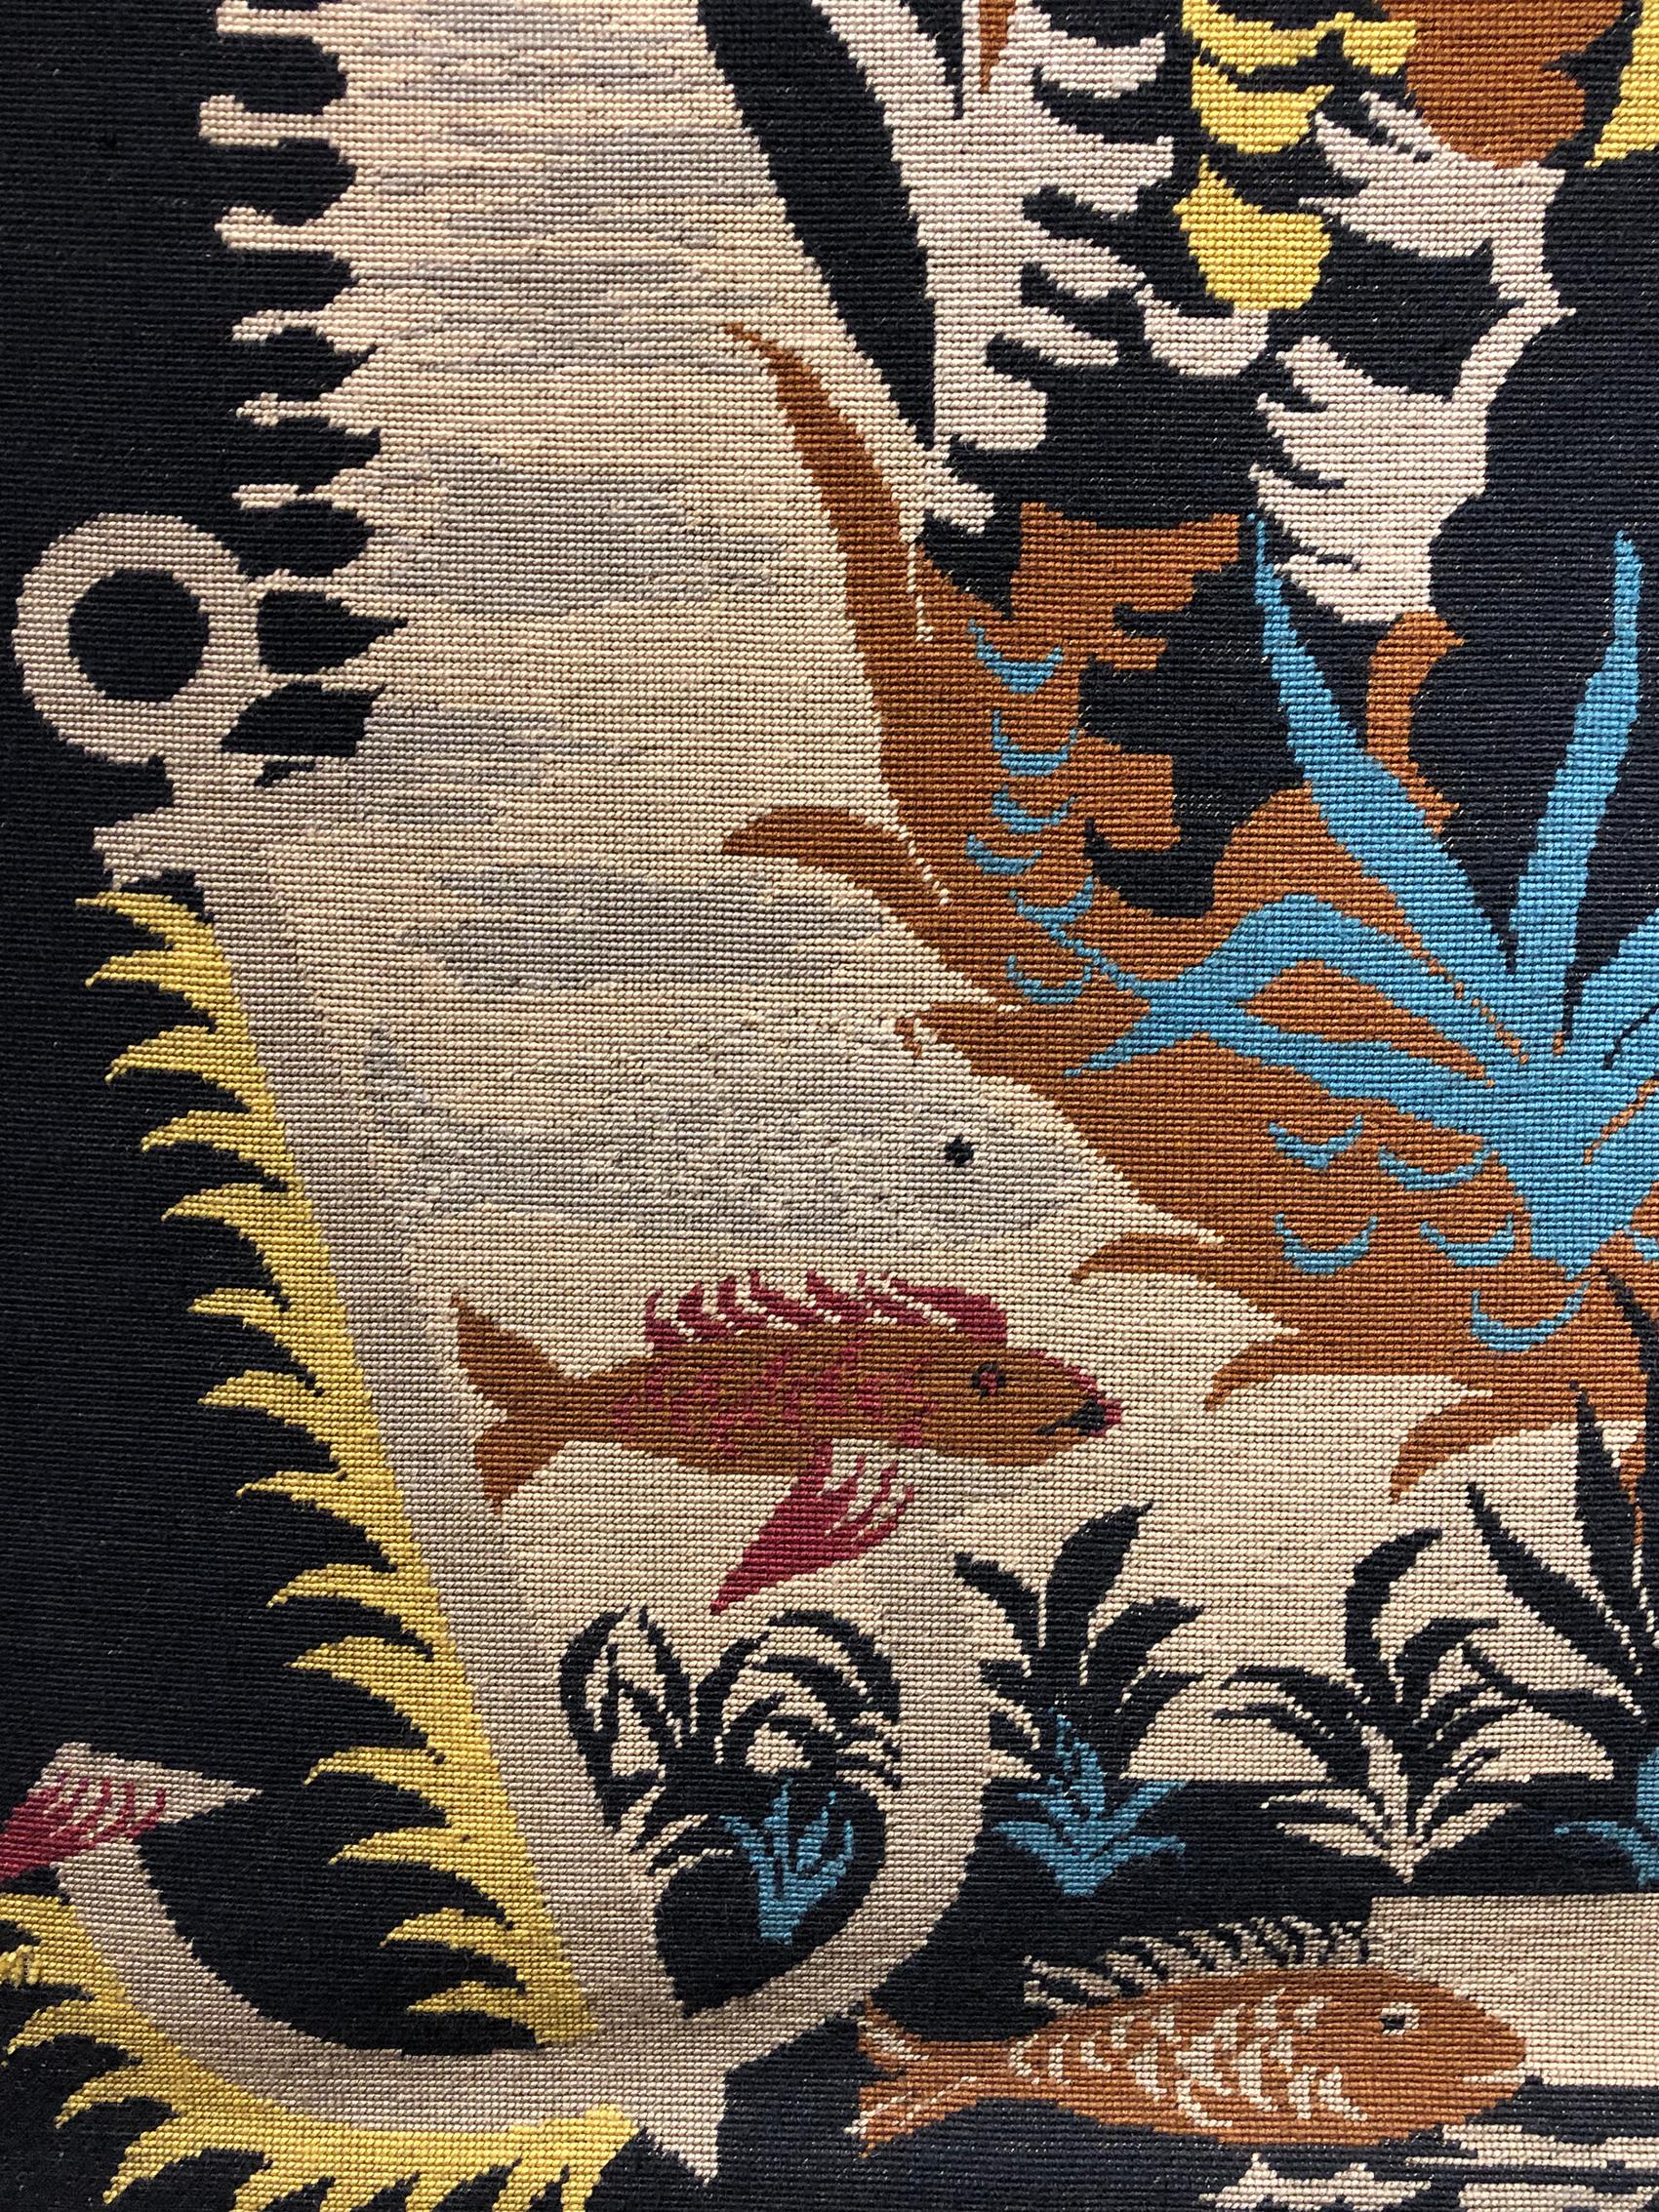 Needlepoint “Maritime” Tapestry Attributed to Jean Lurcat